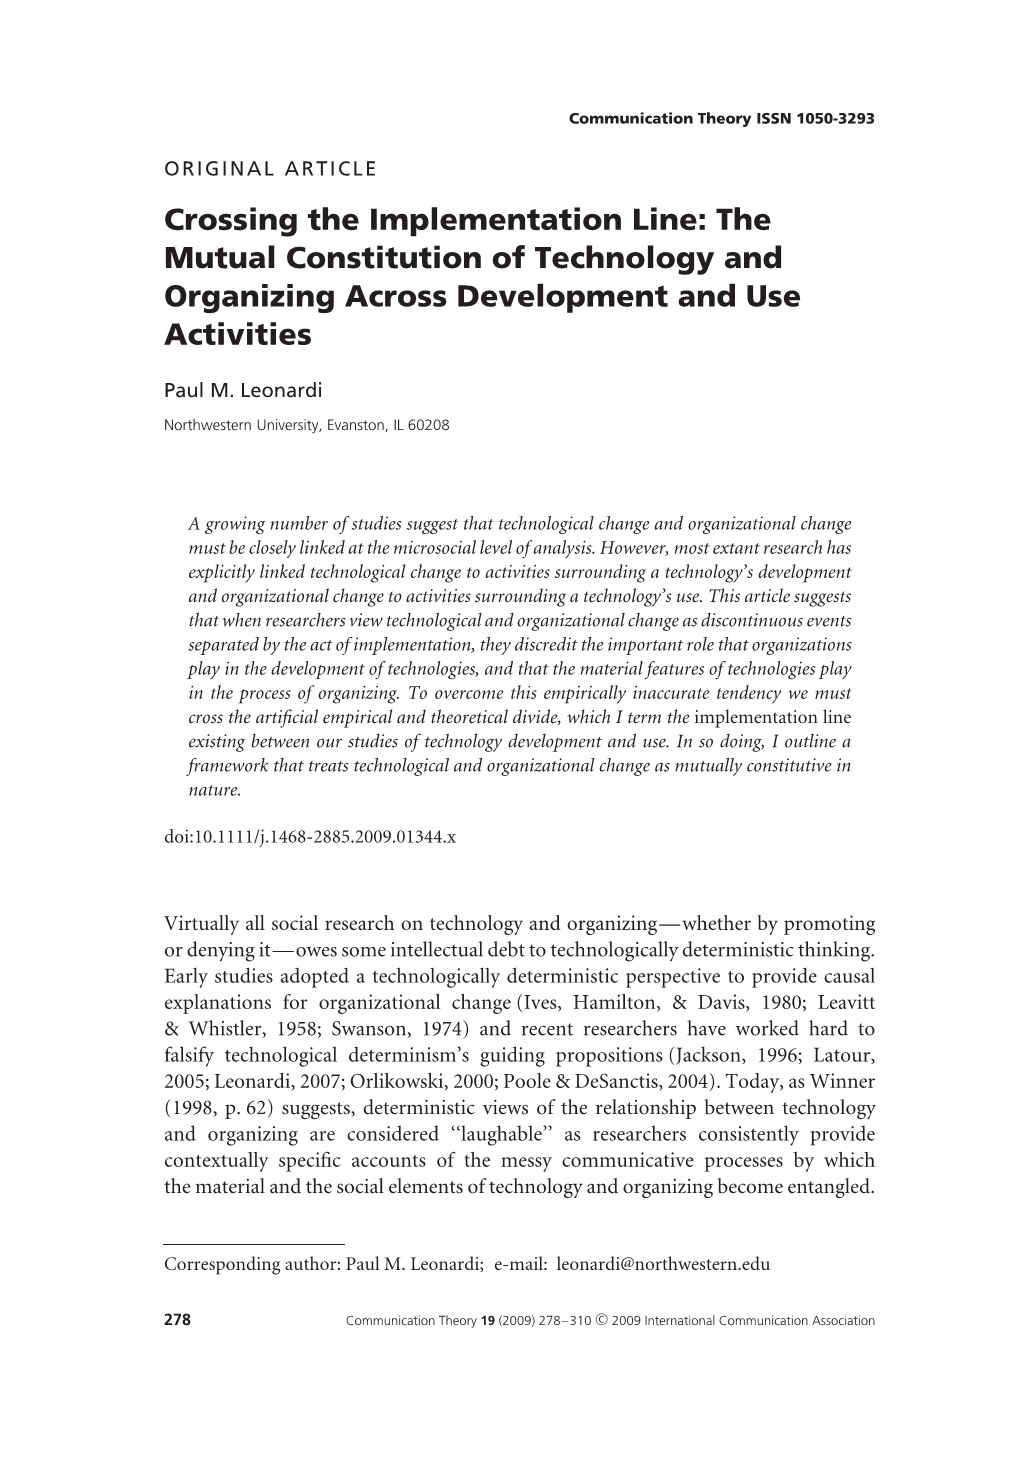 Crossing the Implementation Line: the Mutual Constitution of Technology and Organizing Across Development and Use Activities